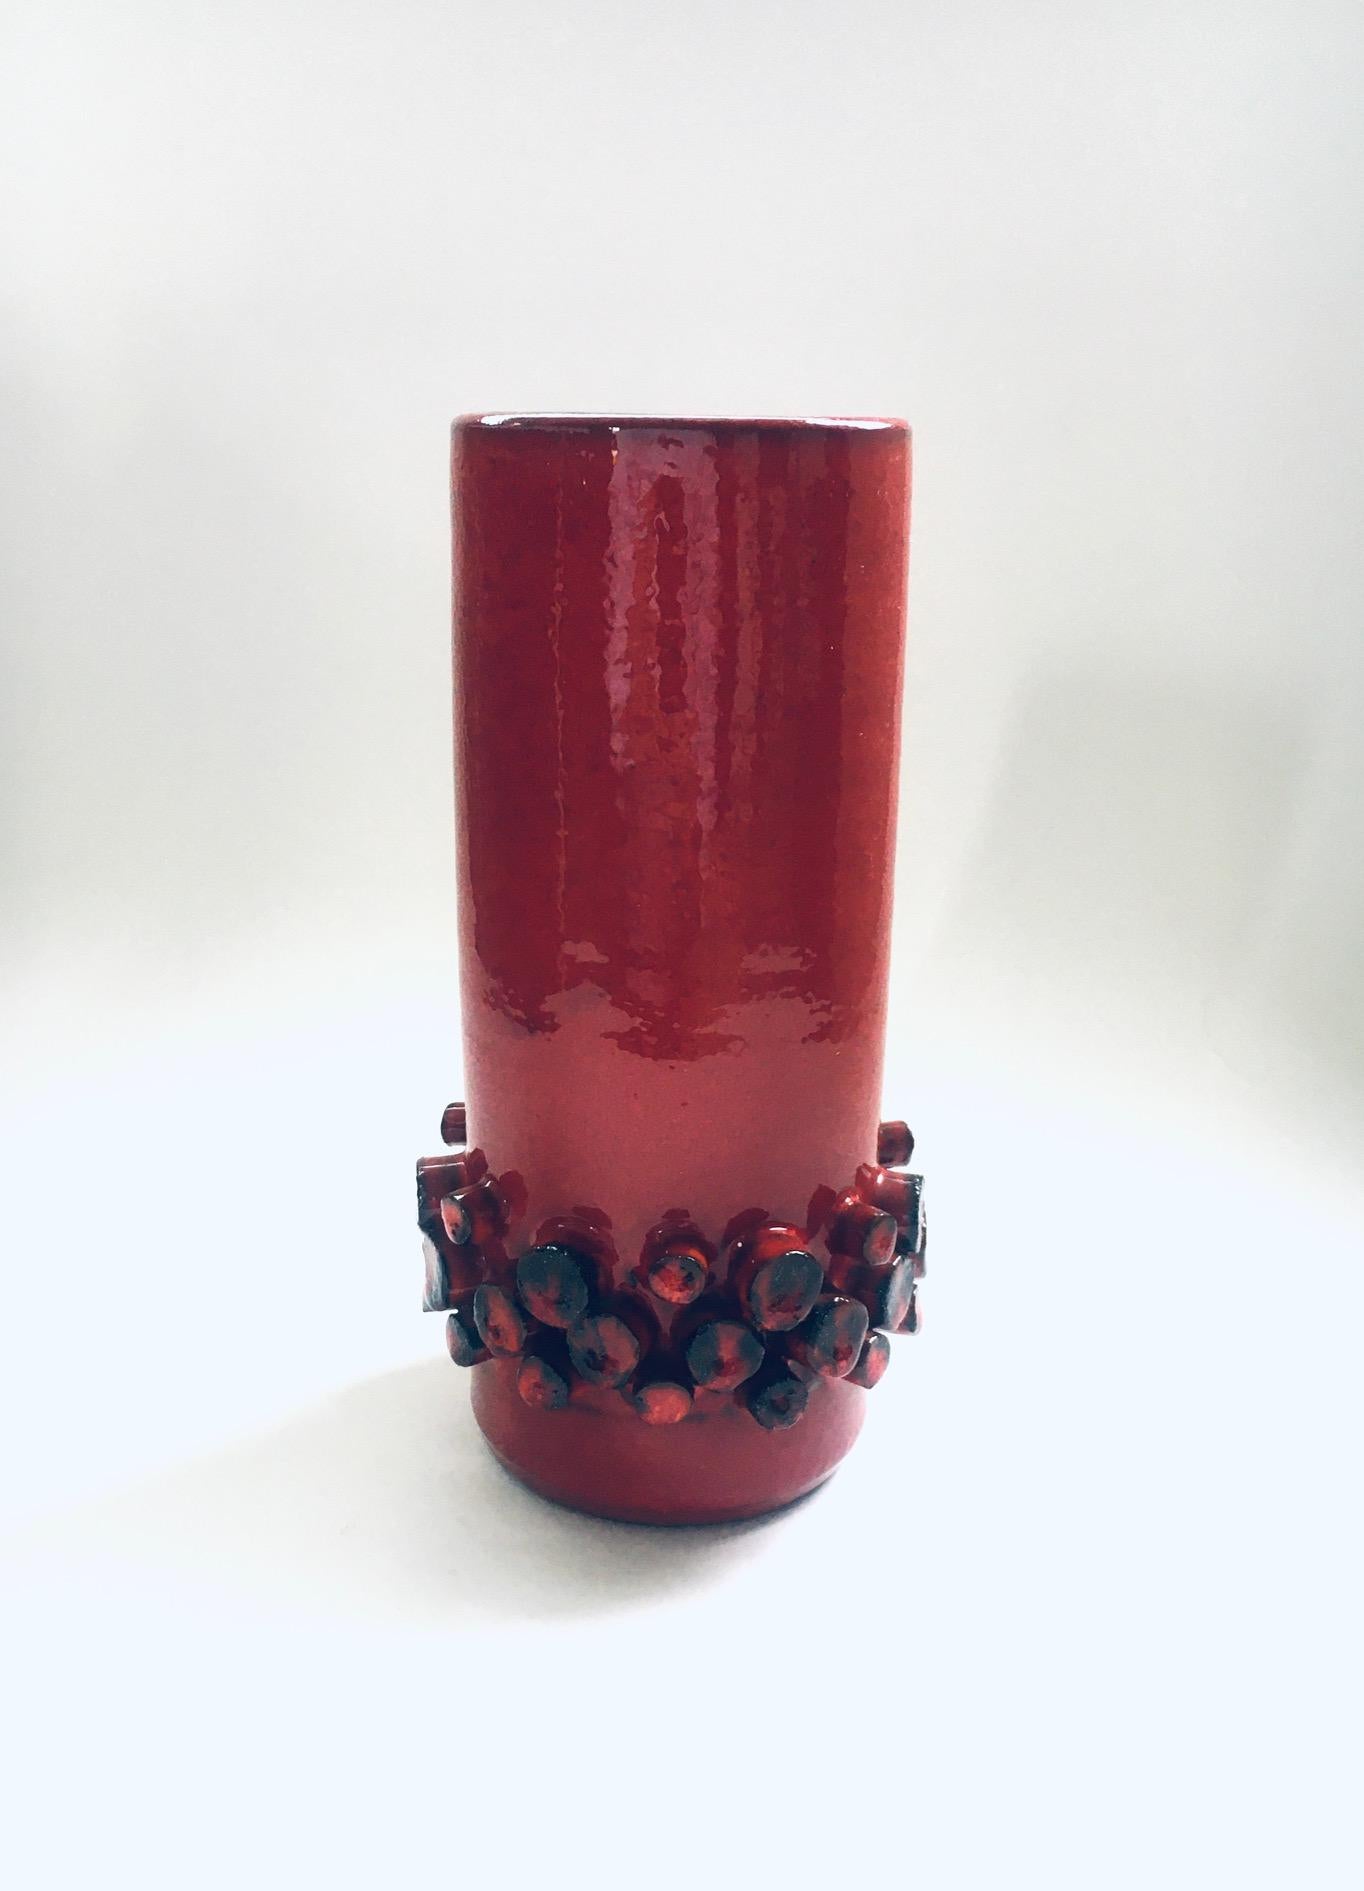 Vintage Midcentury Art Studio Pottery Vase by Hans (Hanns) Welling for Ceramano Ceralux, West Germany 1960's / 70's. Red Fat Lava glazed ceramic vase. Signed at the bottom. Comes in very good condition. Measures 24,5cm x 13cm x 13cm.